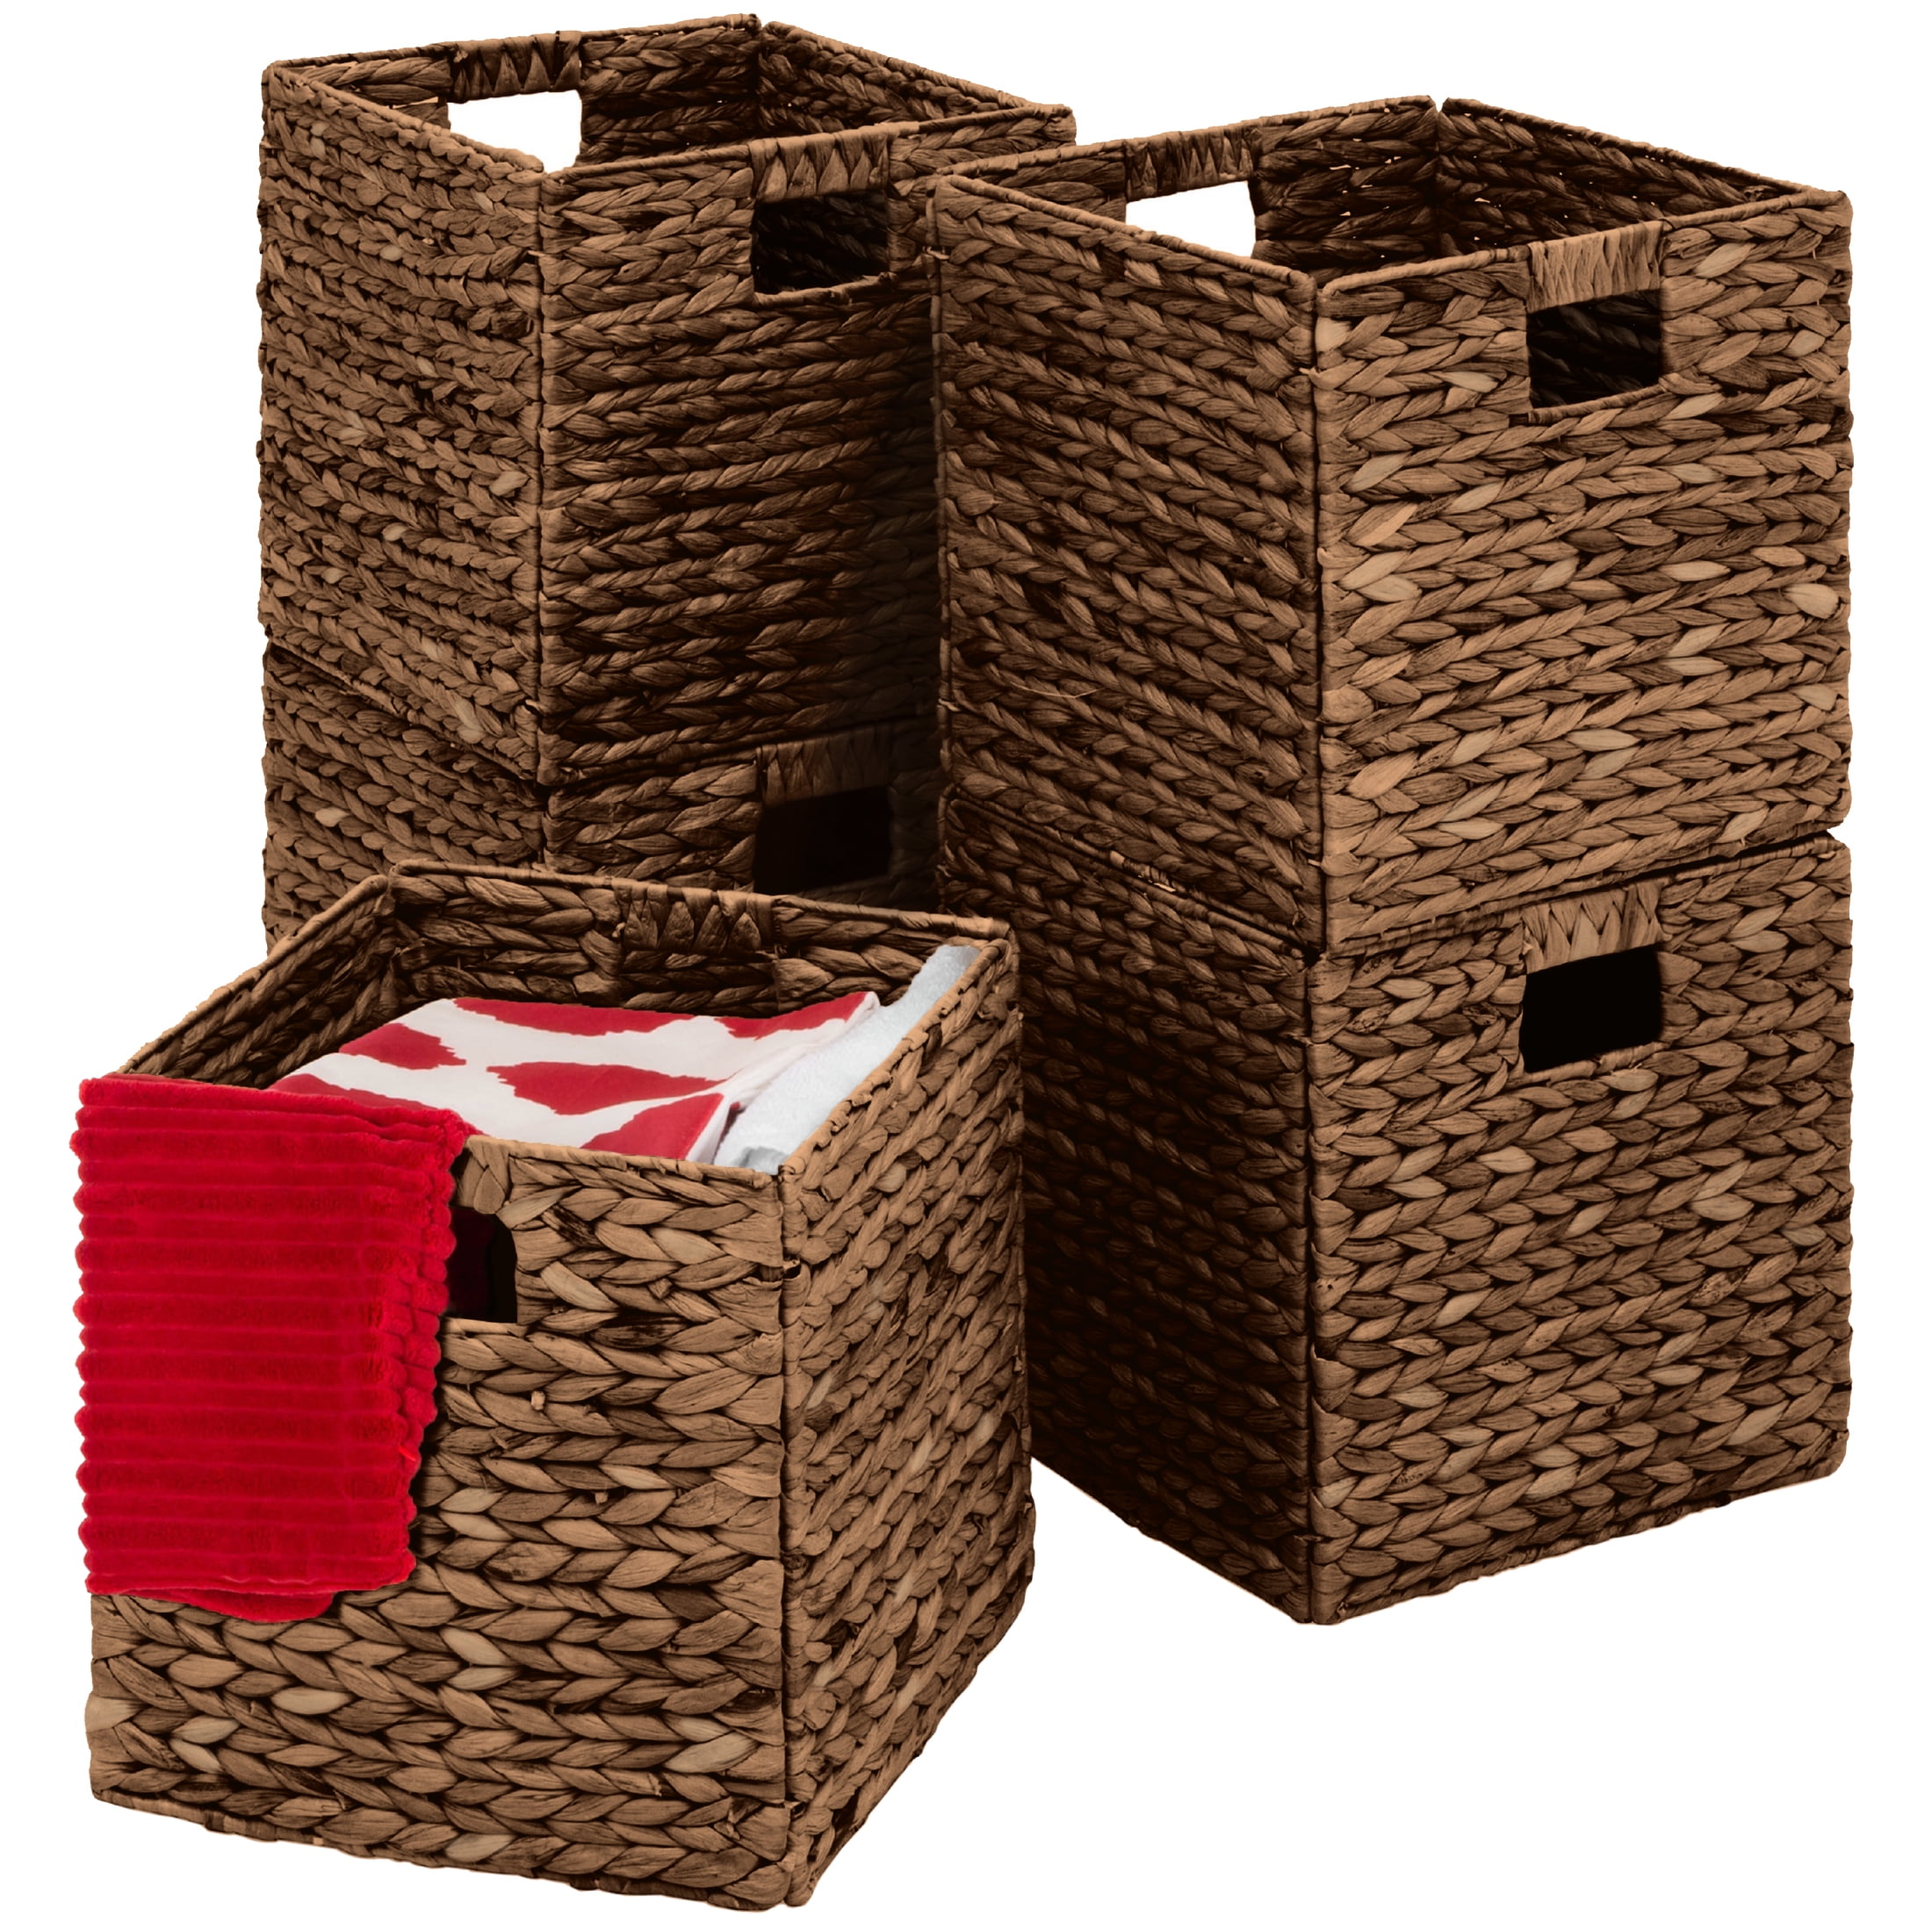  Kishome Rattan Storage Baskets for Shelves, Rectangle Small  Baskets for Organizing, Wood Woven Storage Baskets with Handles, Decorative  Basket for Books Shelves, Laundry Room, Brown, Set of 2 : Home 